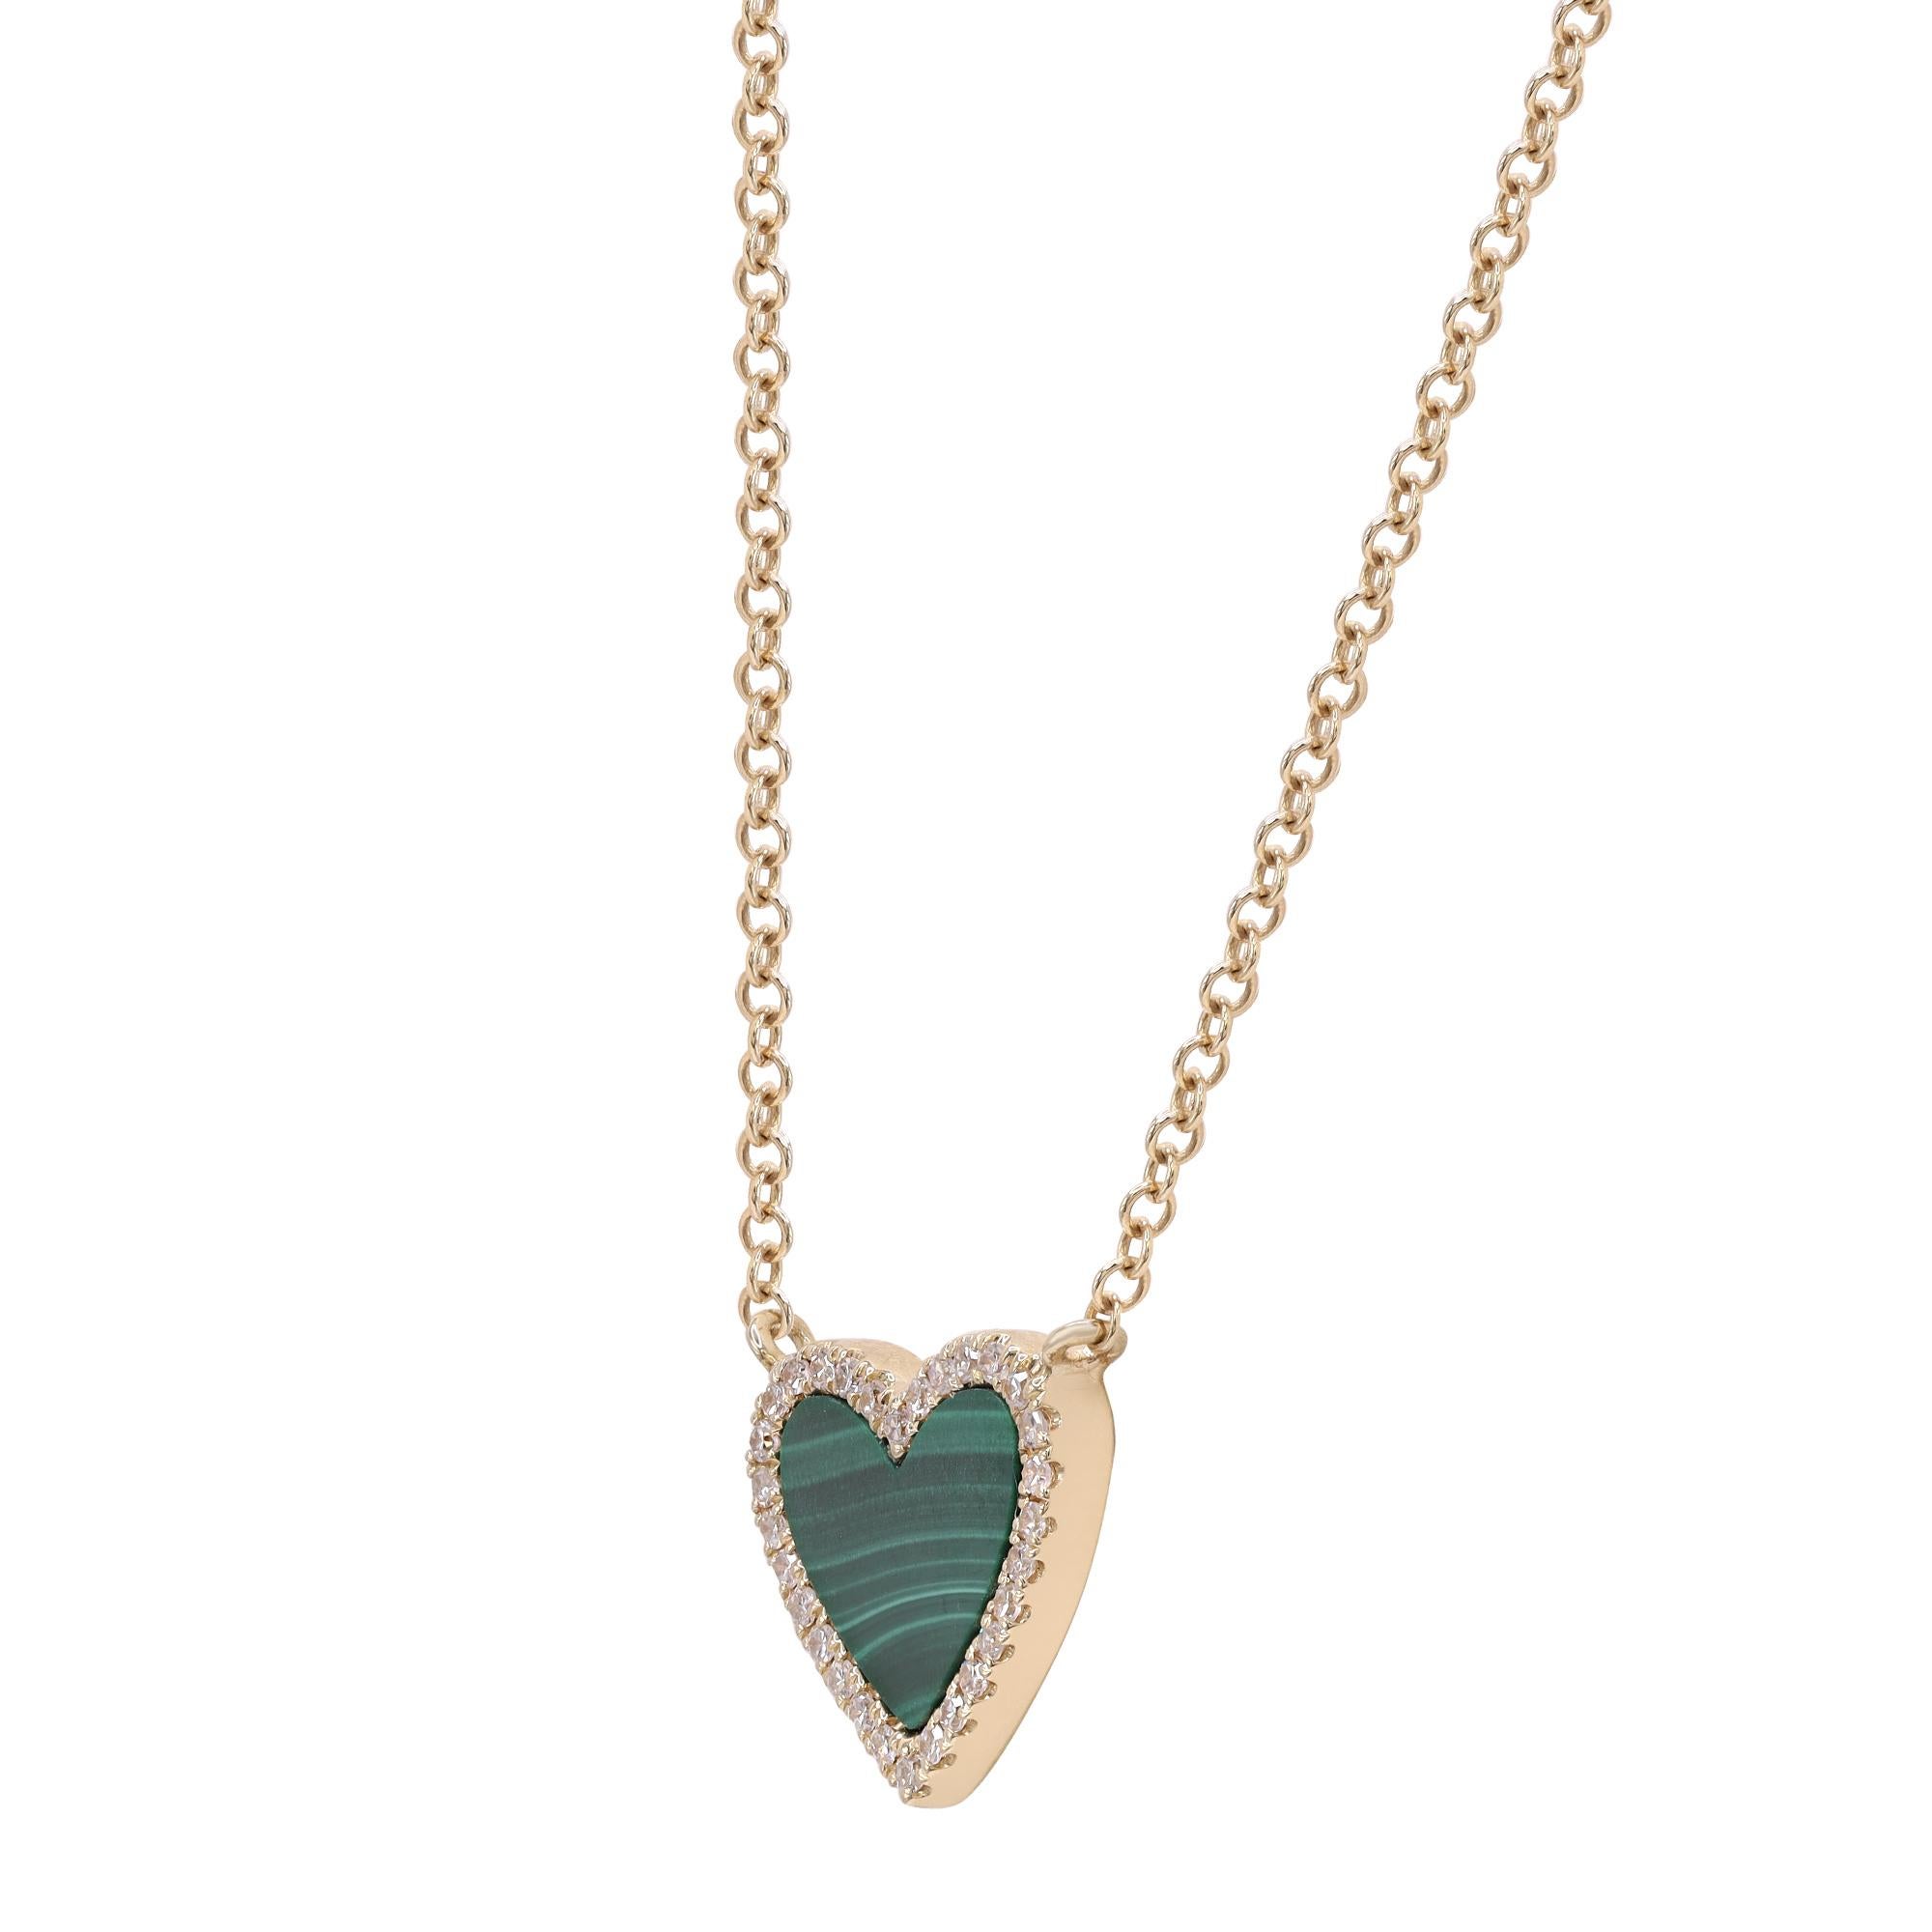 Embrace the beautiful heart shaped green Malachite pendant necklace highlighted by a halo of glistening diamonds. The sparkling round cut diamonds weighing 0.10ct create a striking contrast against the green malachite gem weighing 0.81ct. Diamonds